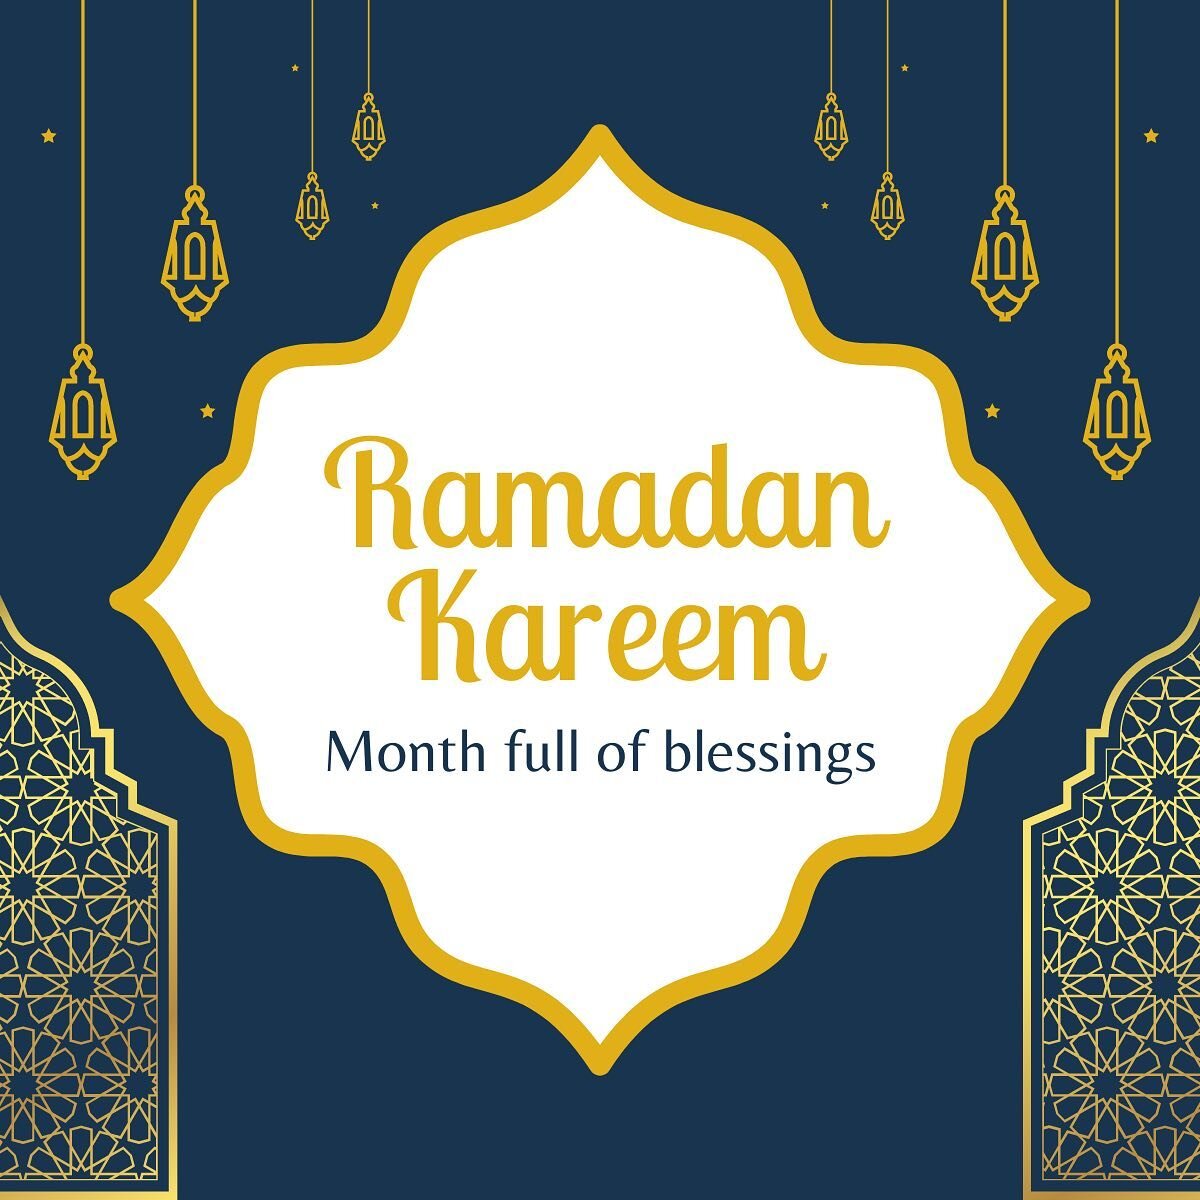 As the holy month of Ramadan begins, I extend my warmest wishes to all observing this sacred time. May it be a period of reflection and community for you and your loved ones. Ramadan Mubarak!